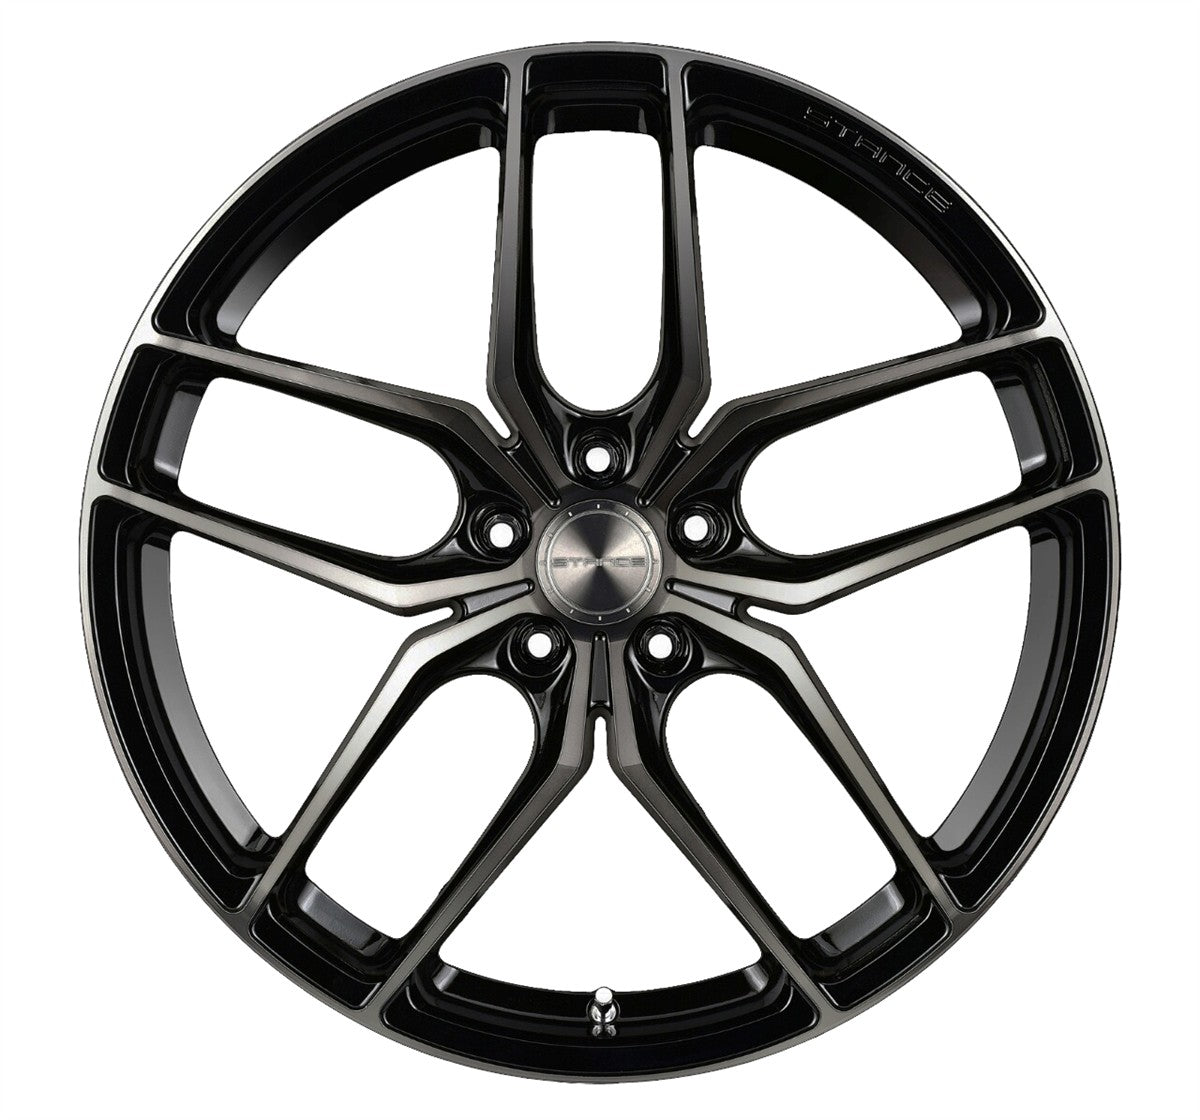 20” Stance SF03 Gloss Black Tinted Face Concave Wheels - Set of 4 - Motorsports LA